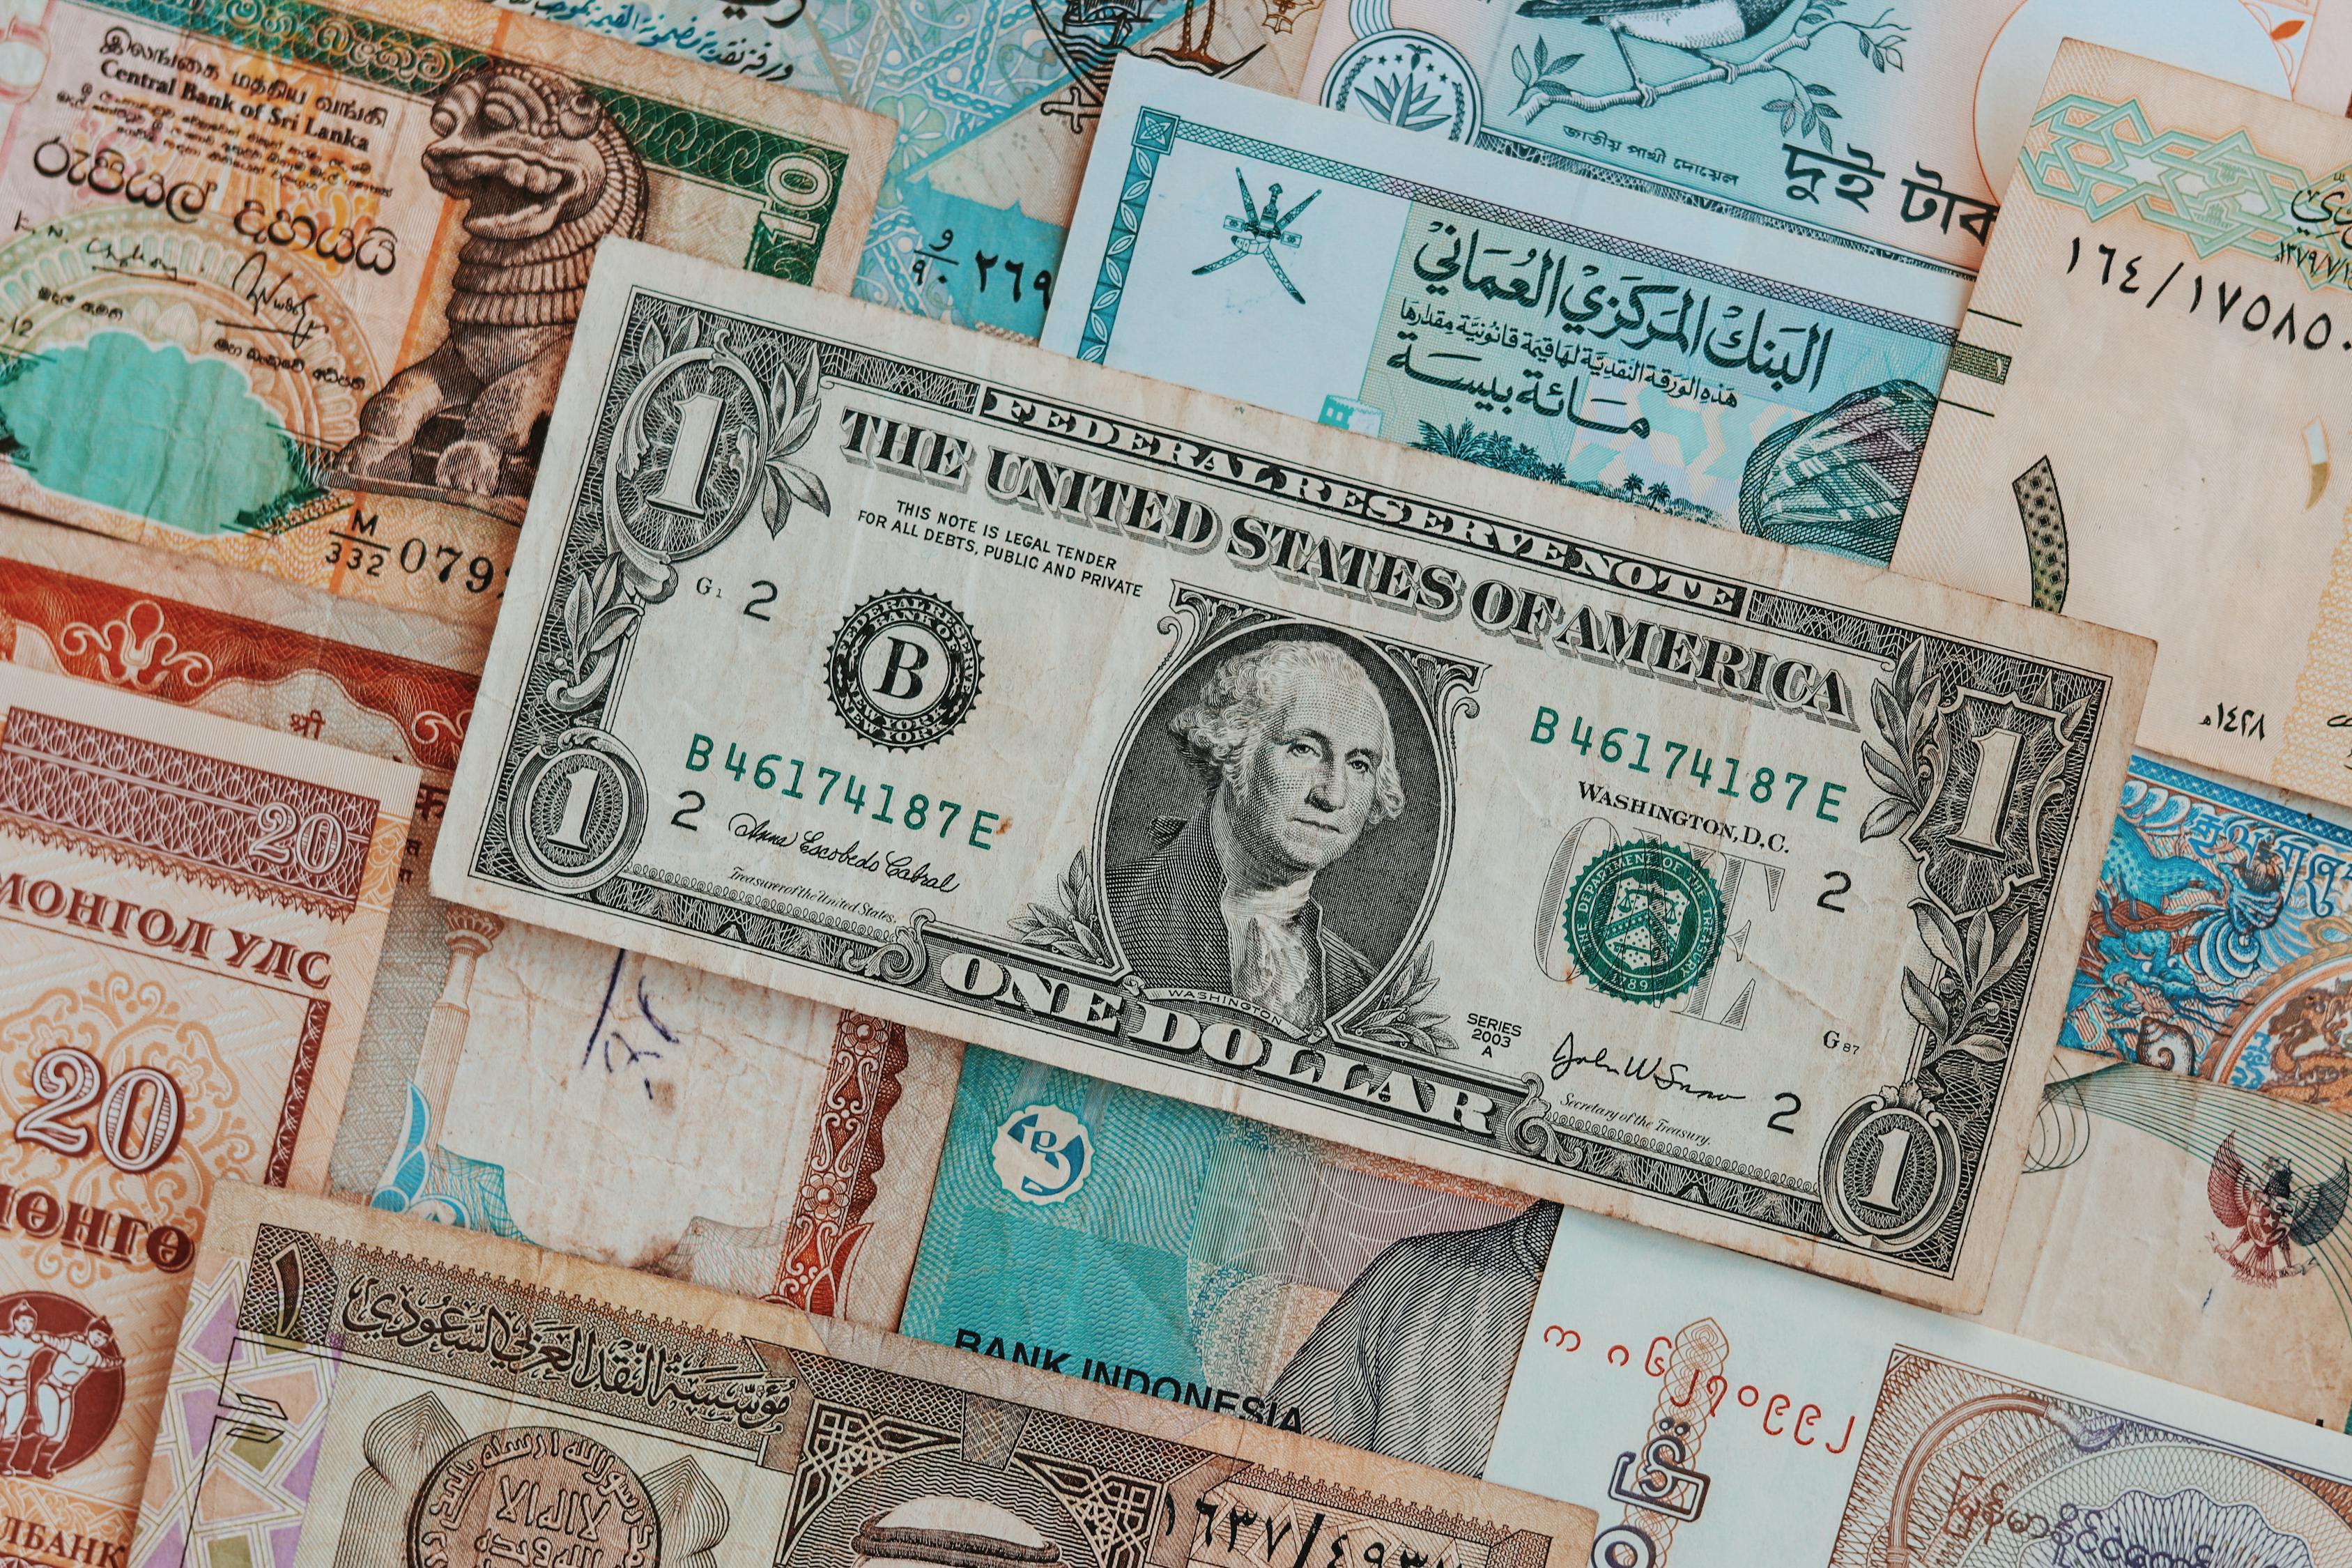 collection-of-banknotes-with-dollar-bill-on-top-free-stock-photo